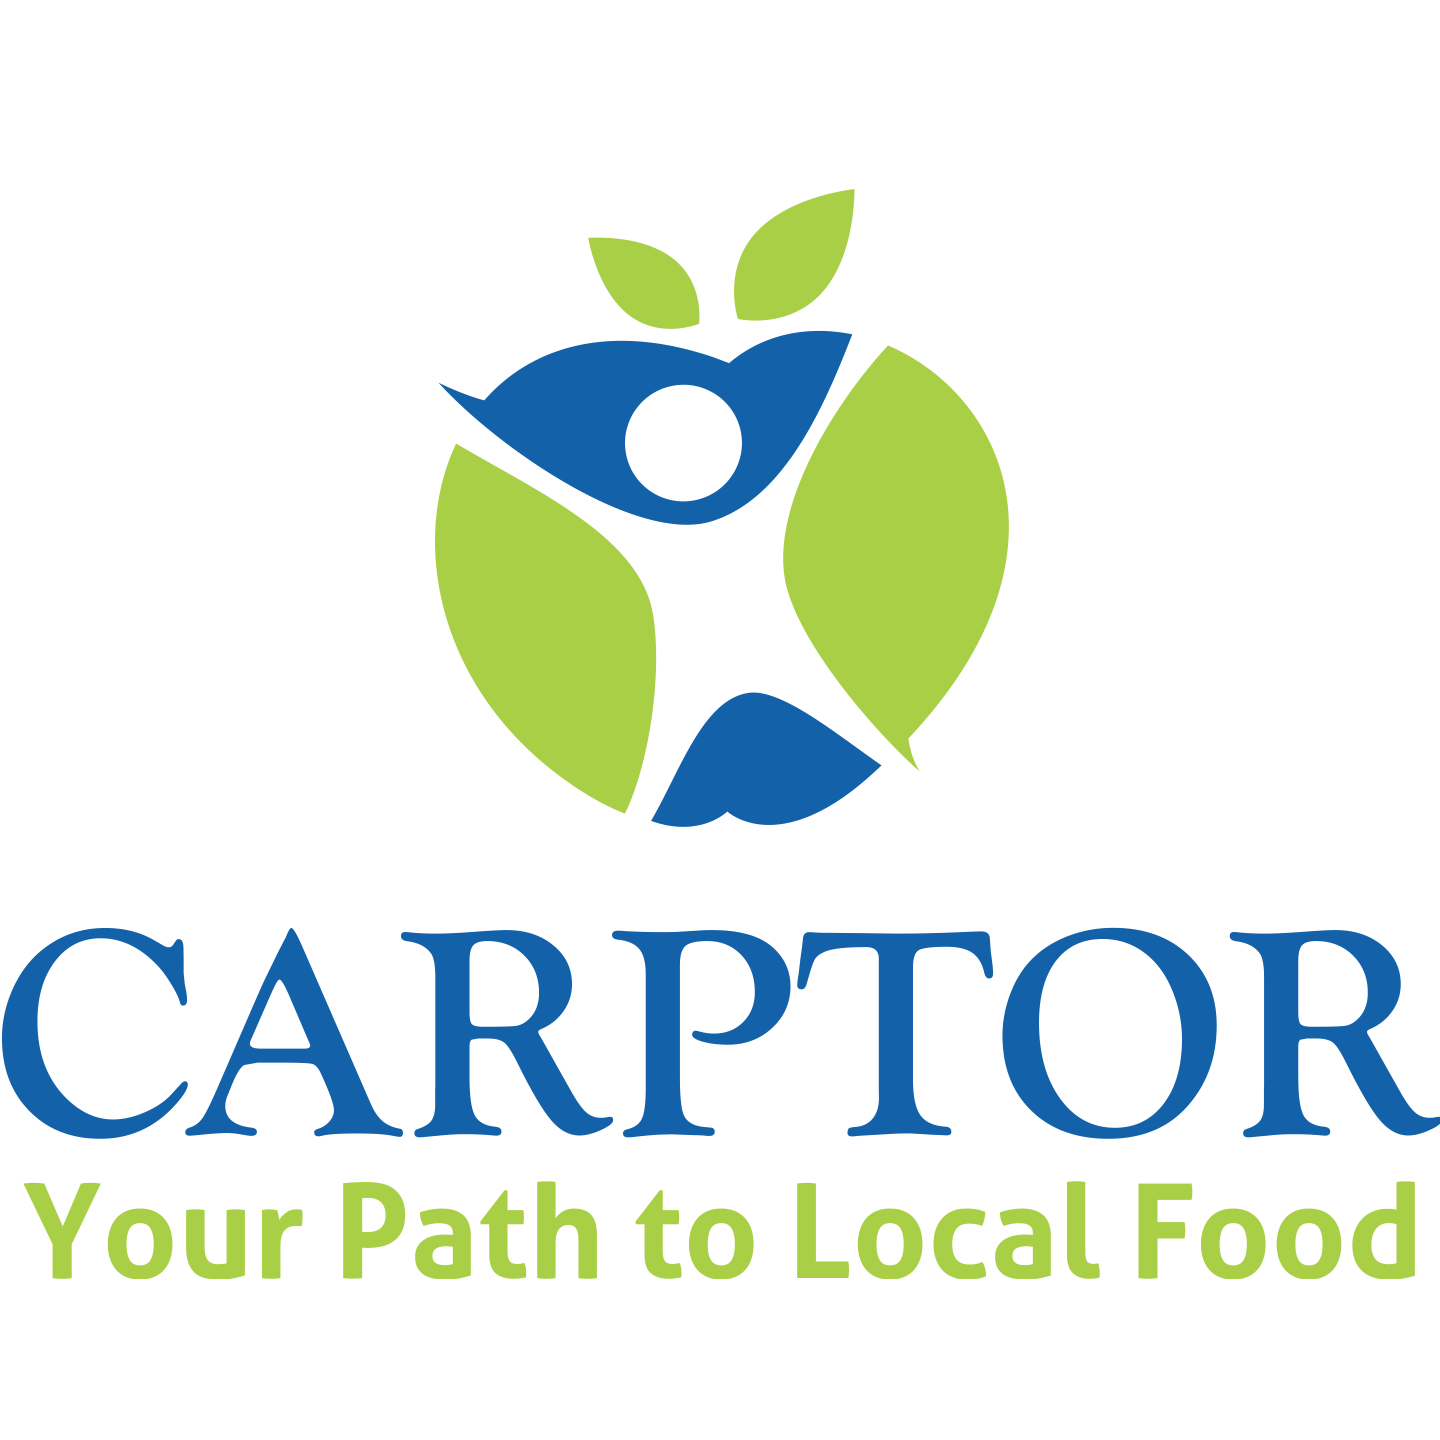 This is the logo for the company "Carptor" and has the company name along with "Your Path to Local Food" in the centre of the logo. There is an icon of a green apple above the text.